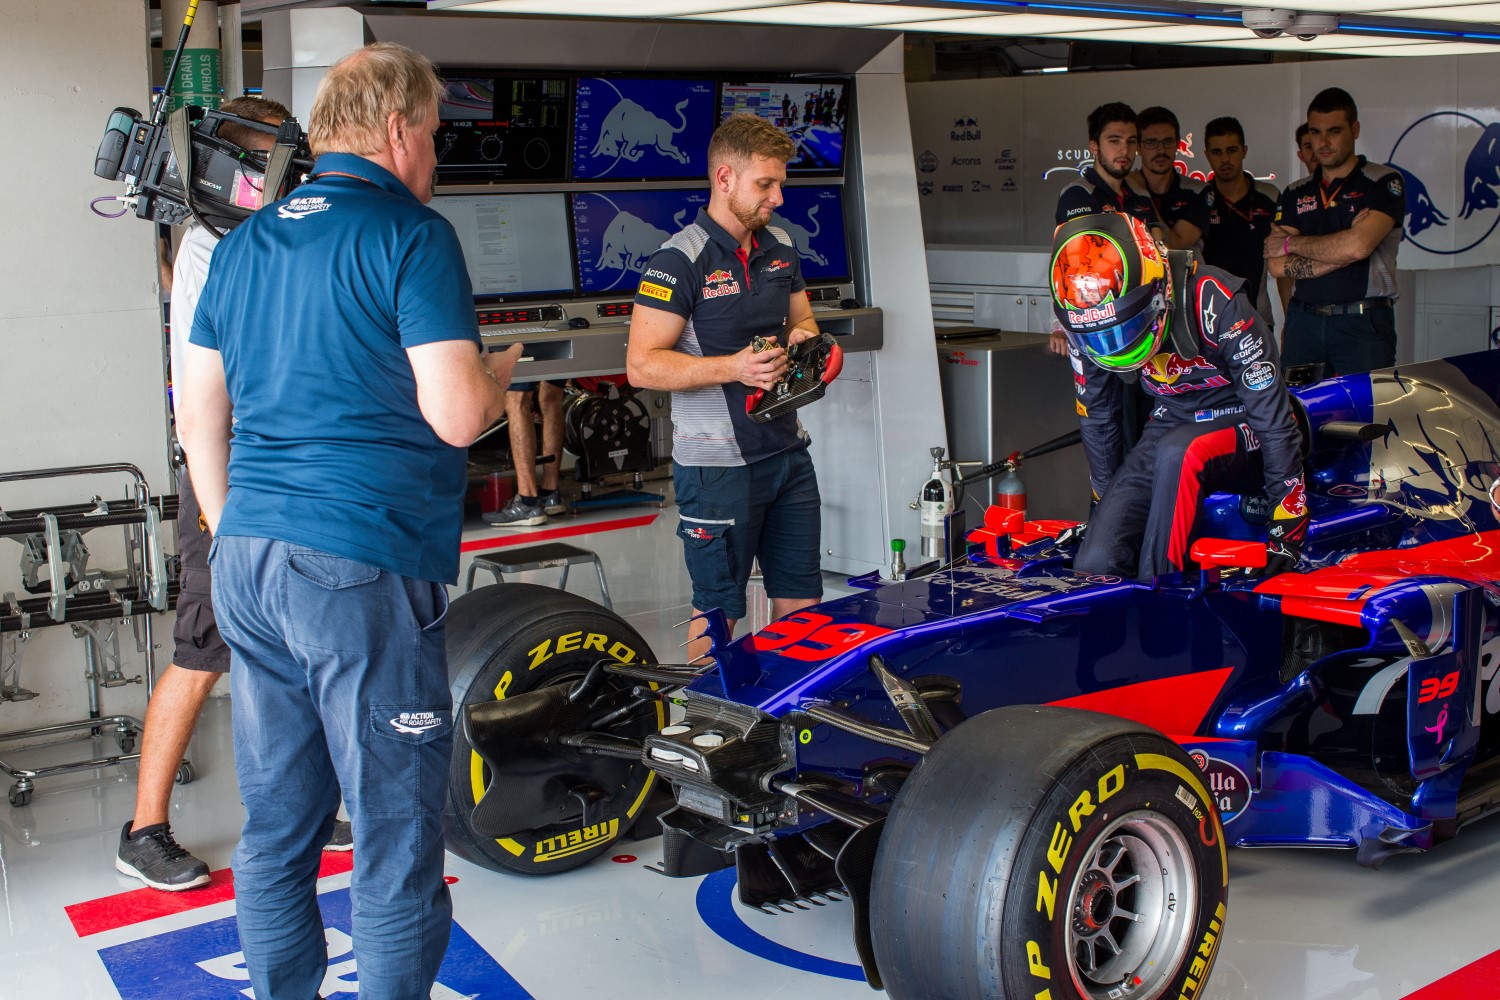 Hartley's seat fitting